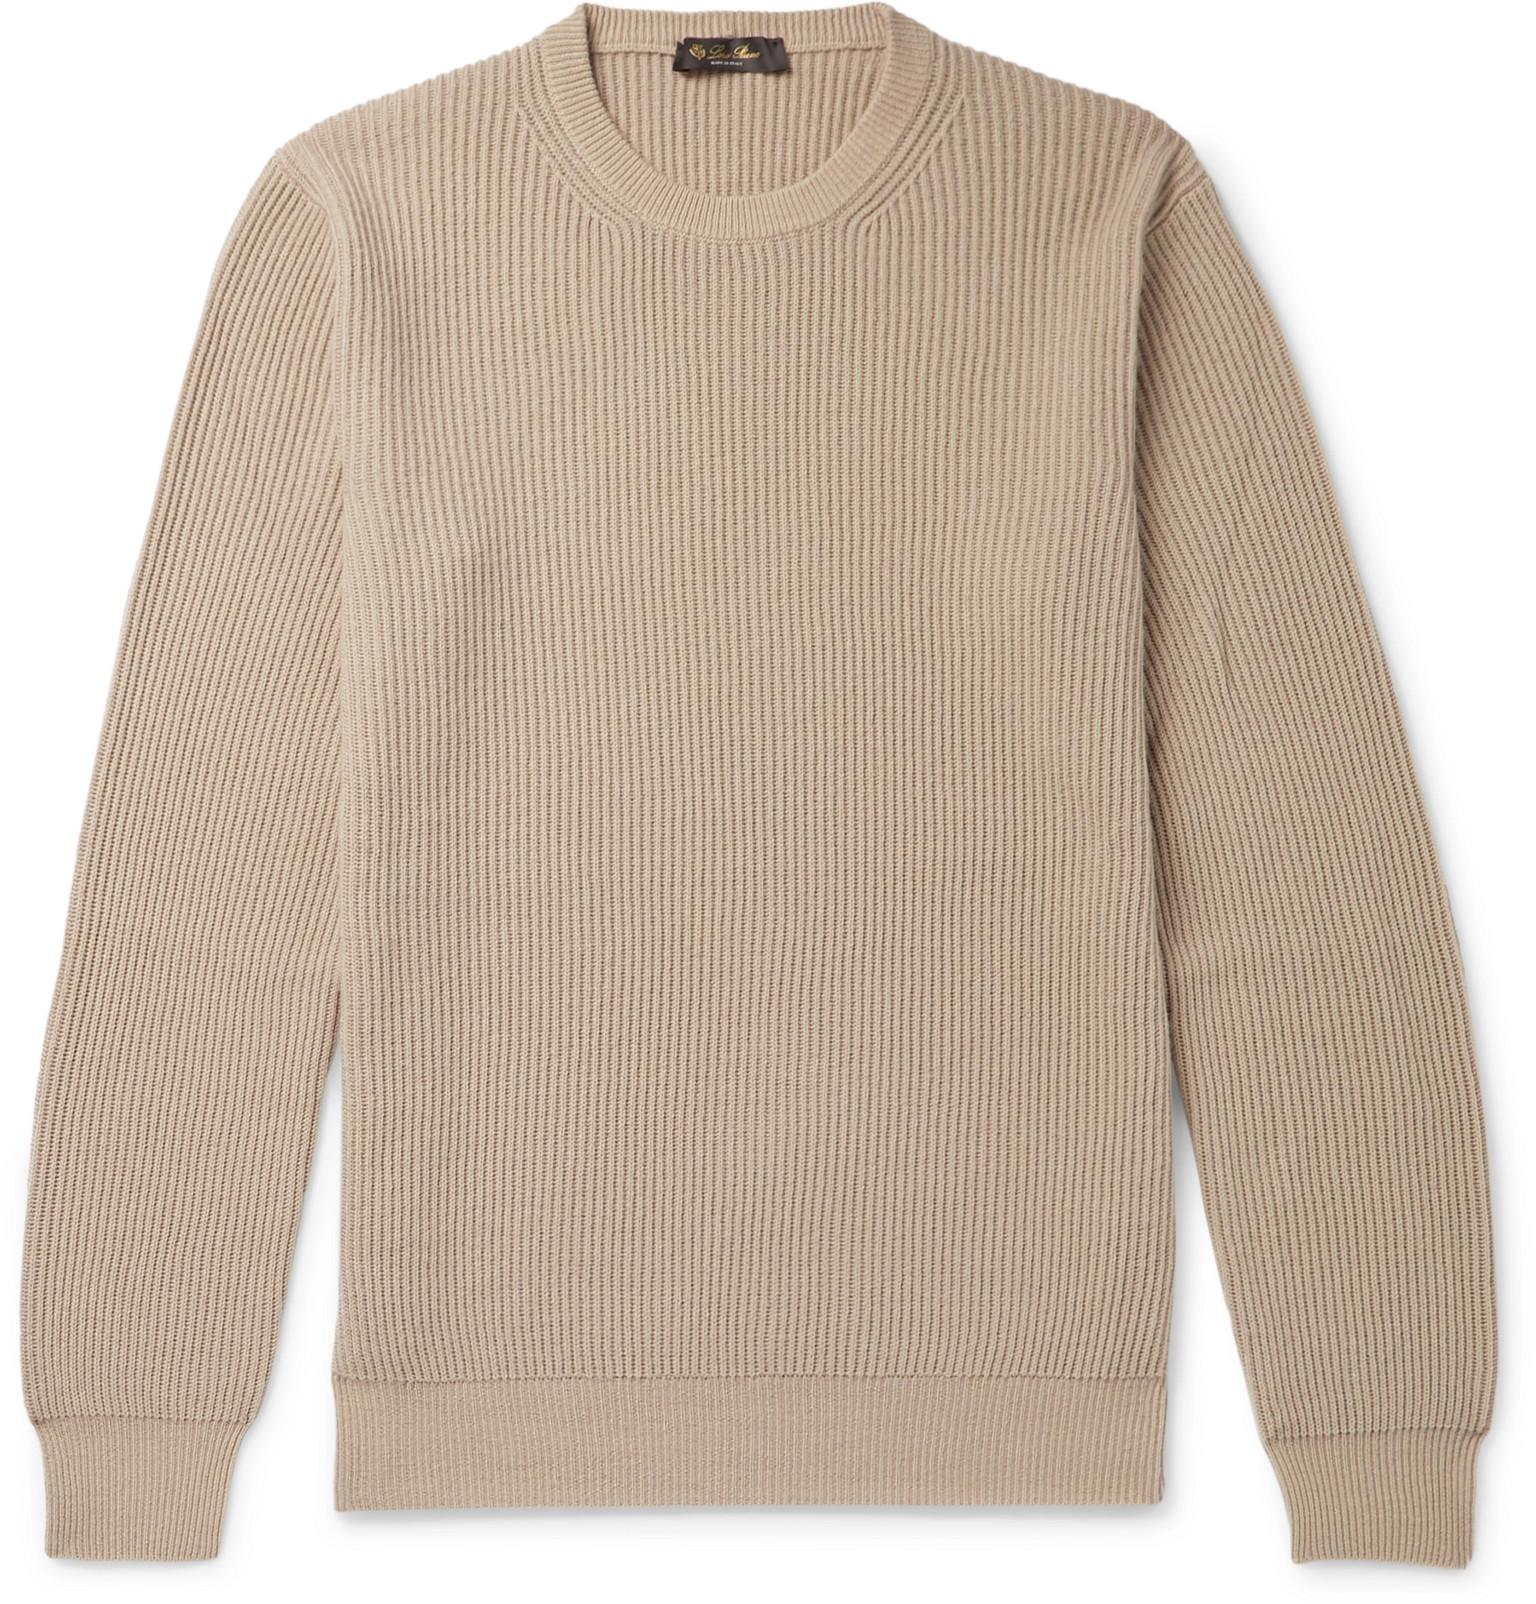 Loro Piana Ribbed Cashmere Sweater in Natural for Men - Lyst